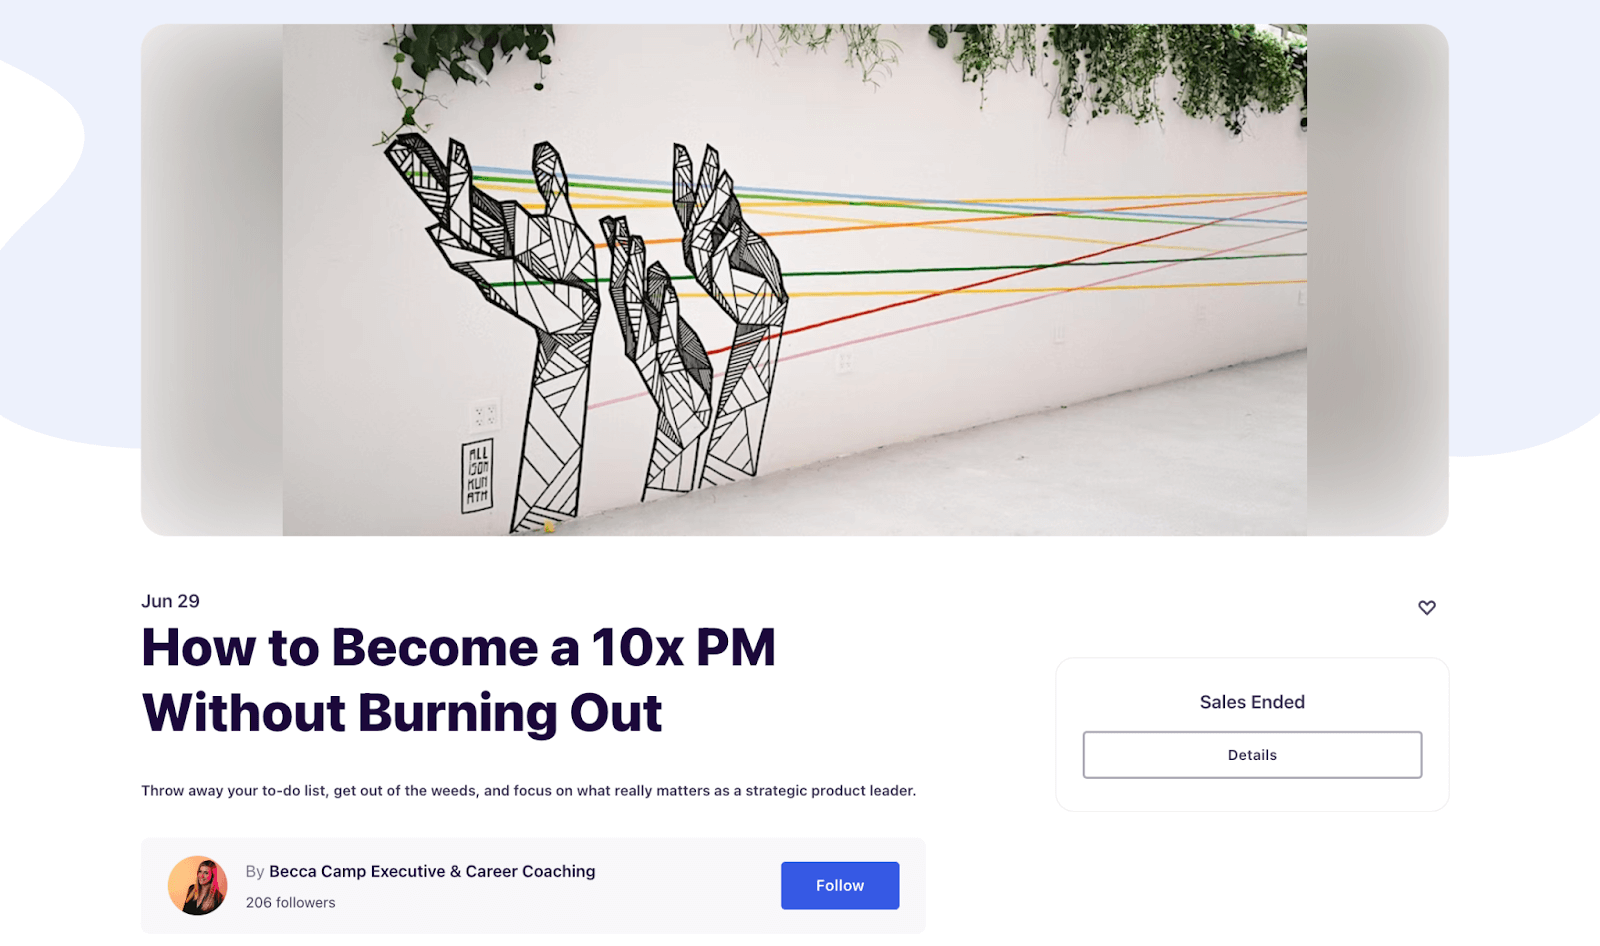 How to beccome 10x the PM without burning out (1)